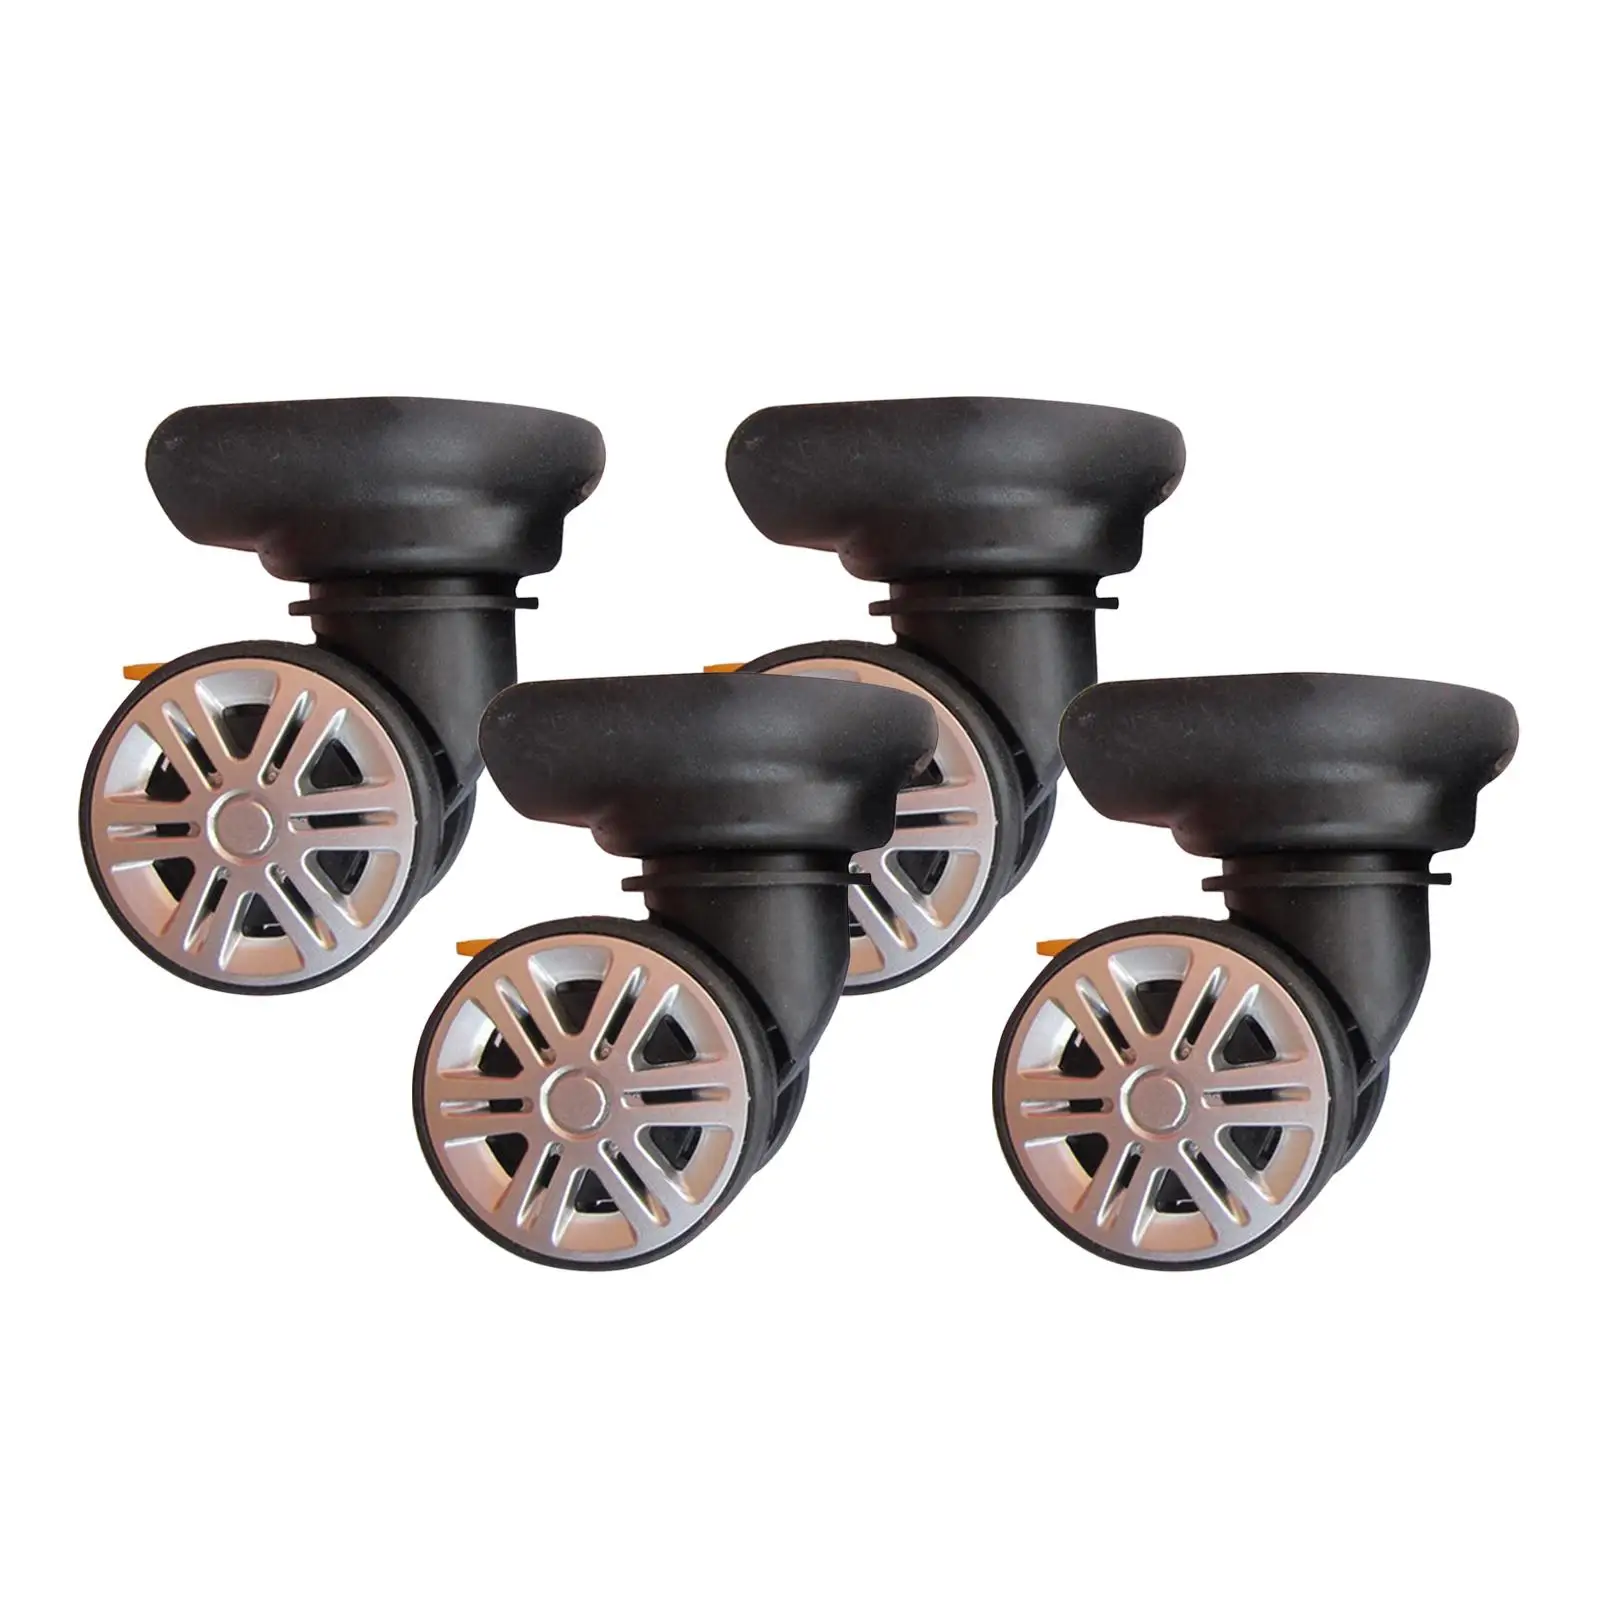 4Pcs Luggage Suitcase Wheels Replacement Parts Portable Suitcase Swivel Wheels for Travelling Case Luggage Trolley Case